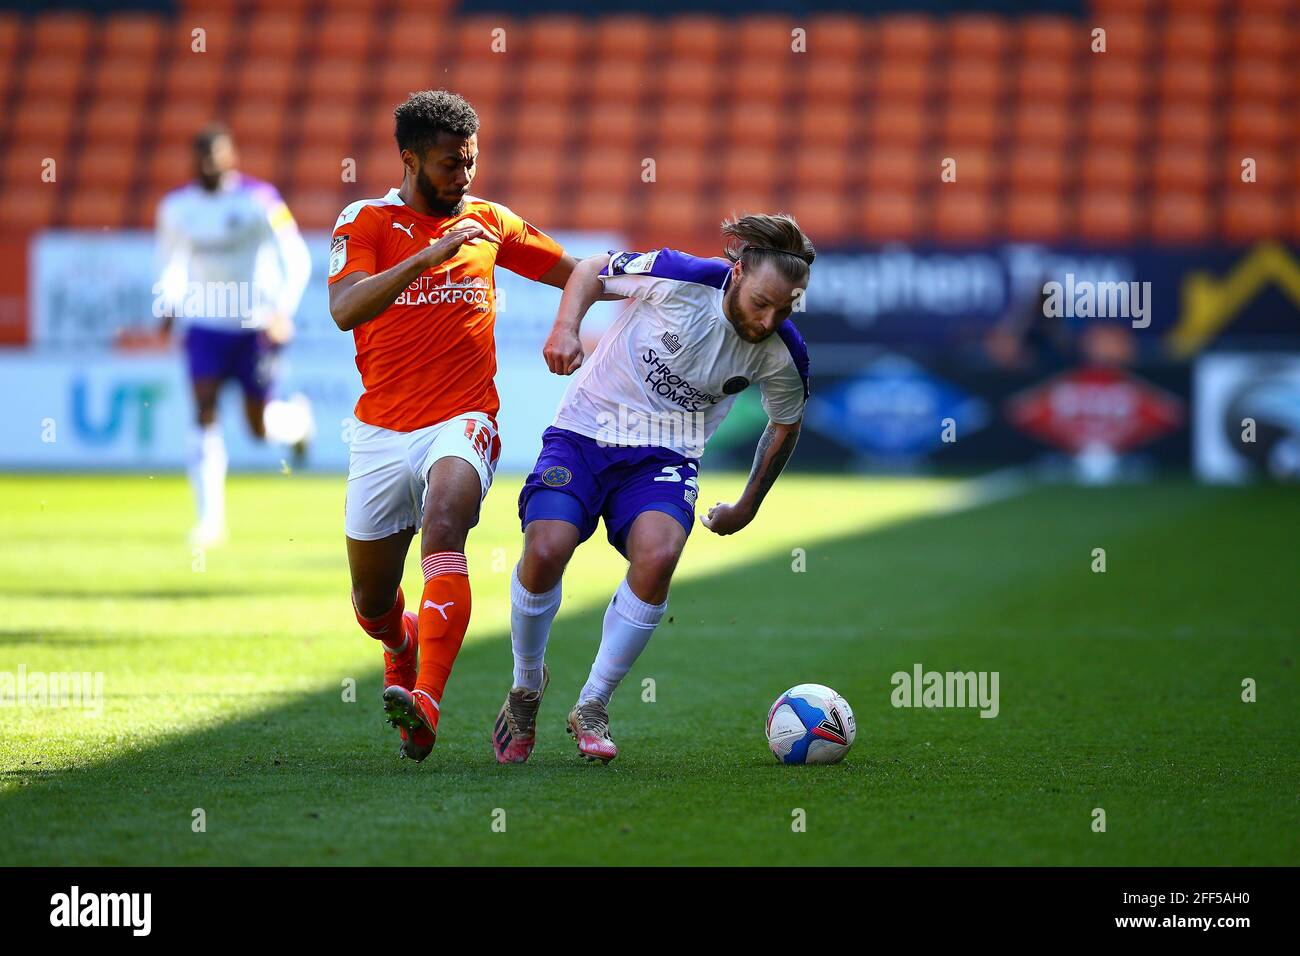 Bloomfield Road, Blackpool, UK. 24th Apr, 2021. Harry Chapman (32) of Shrewsbury holds of the challenge from Grant Ward (18) of Blackpool during the game Blackpool v Shrewsbury Sky Bet League One 2020/21 Bloomfield Road, Blackpool, England - 24th April 2021 Credit: Arthur Haigh/Alamy Live News Stock Photo